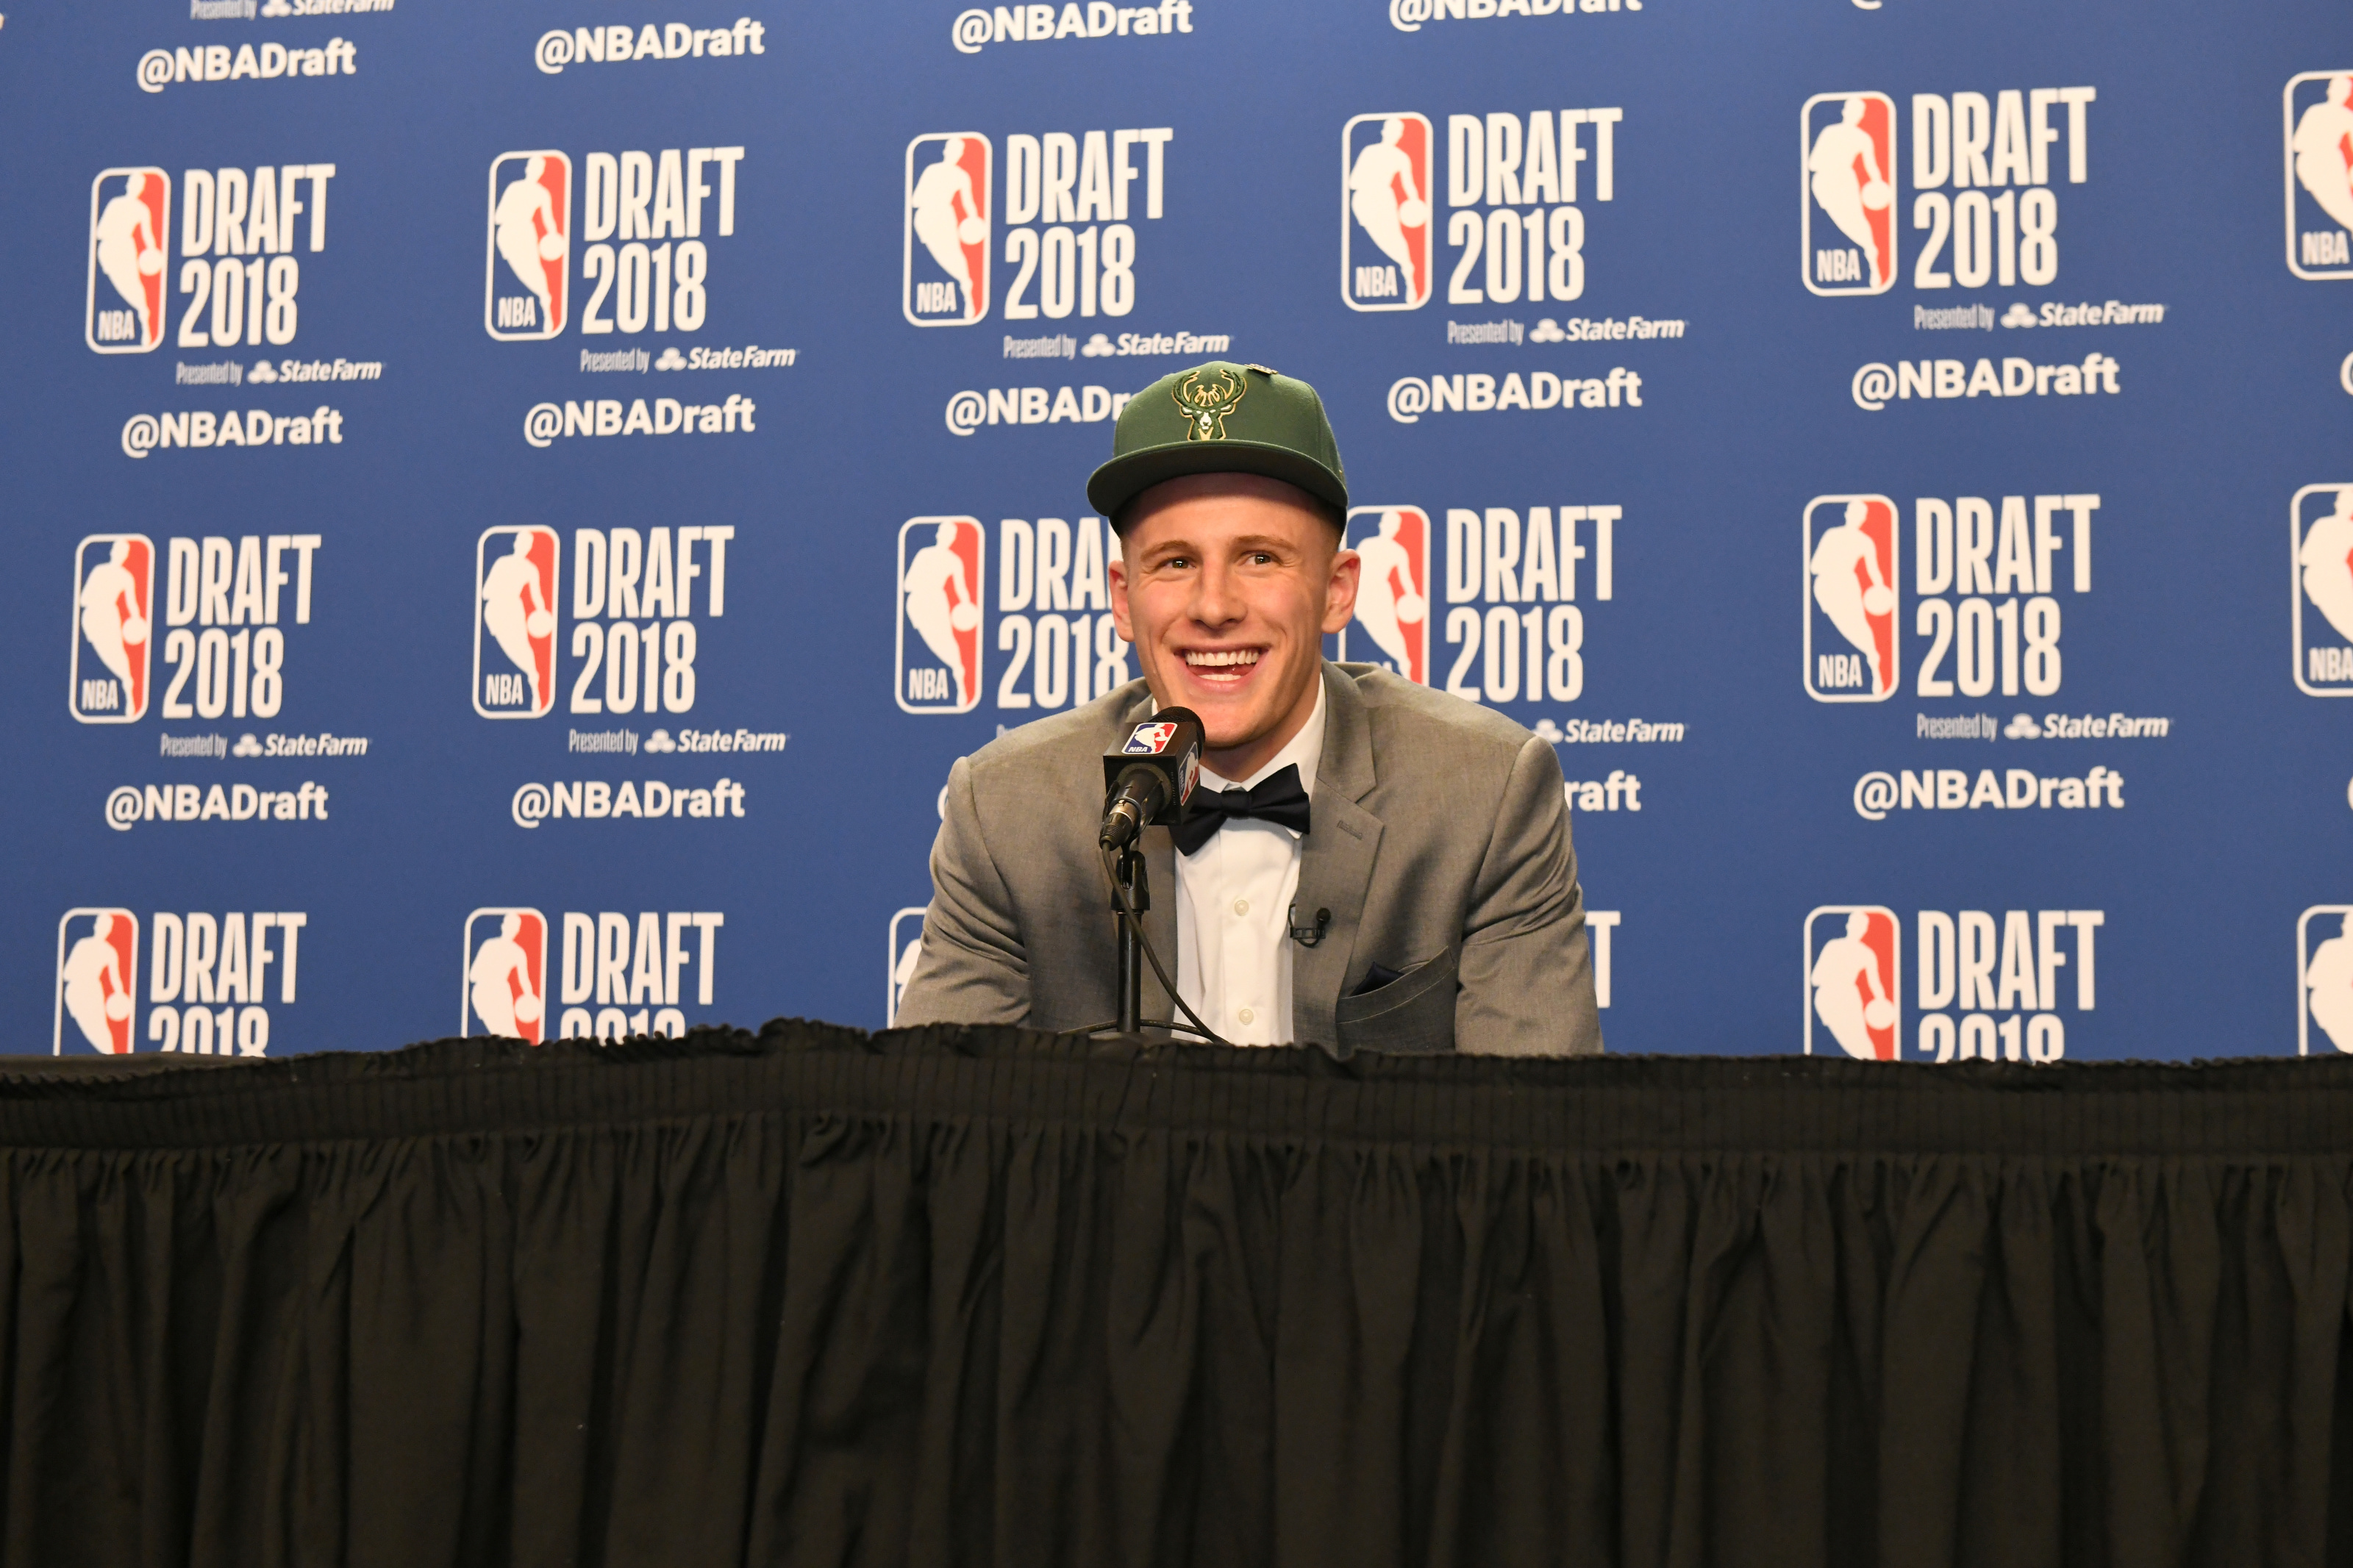 Report: DiVincenzo seriously considering staying in NBA Draft